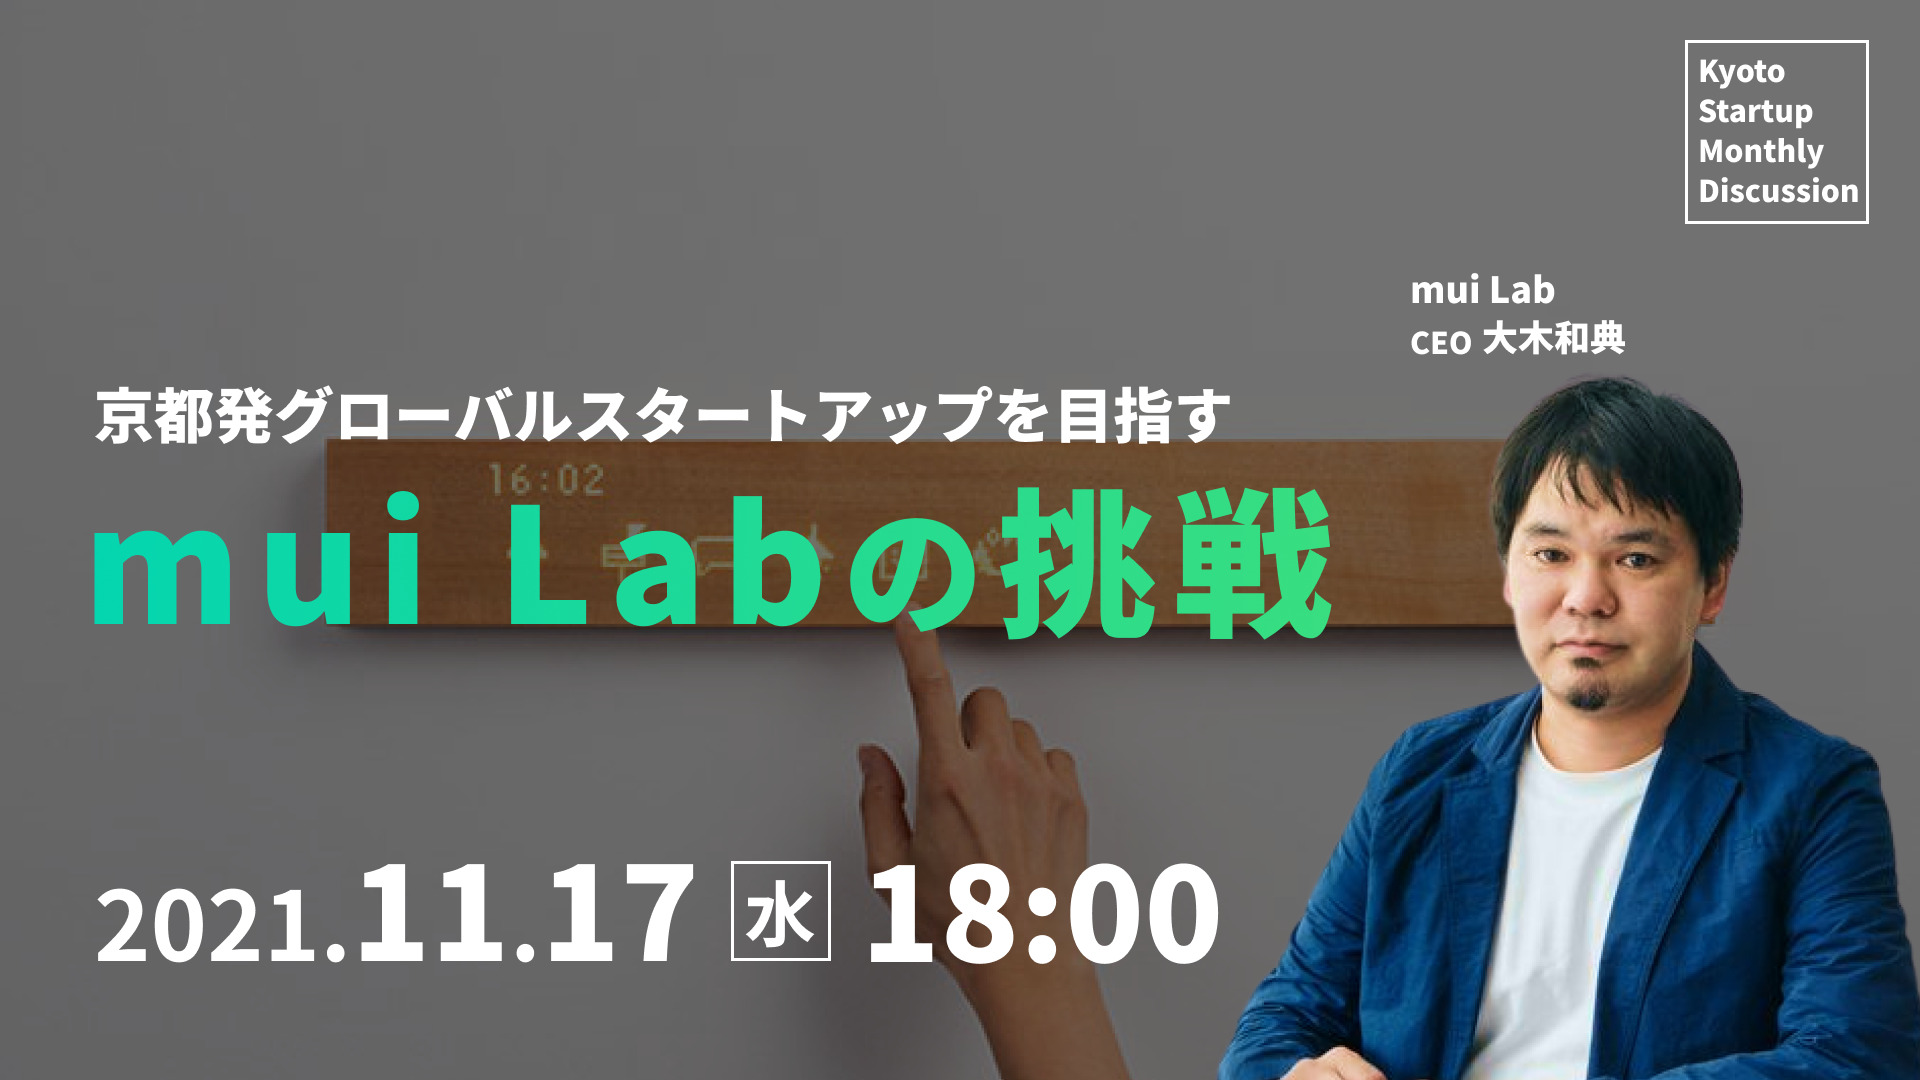 Kyoto Startup Monthly Discussion #06